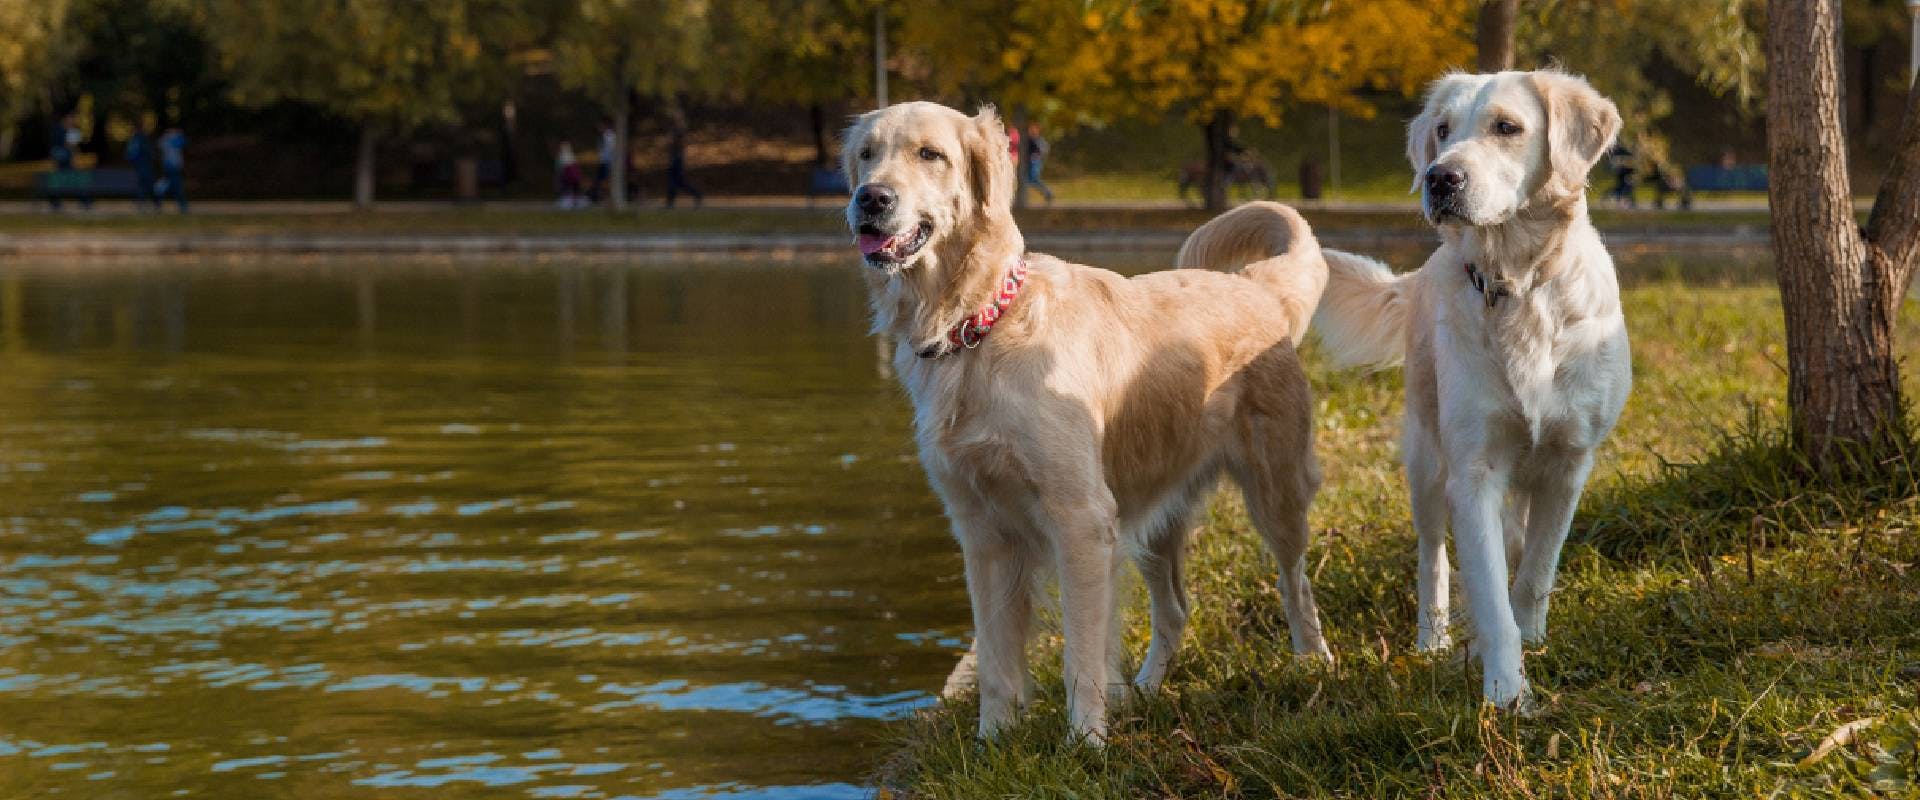 Two Golden Retrievers standing by a lake